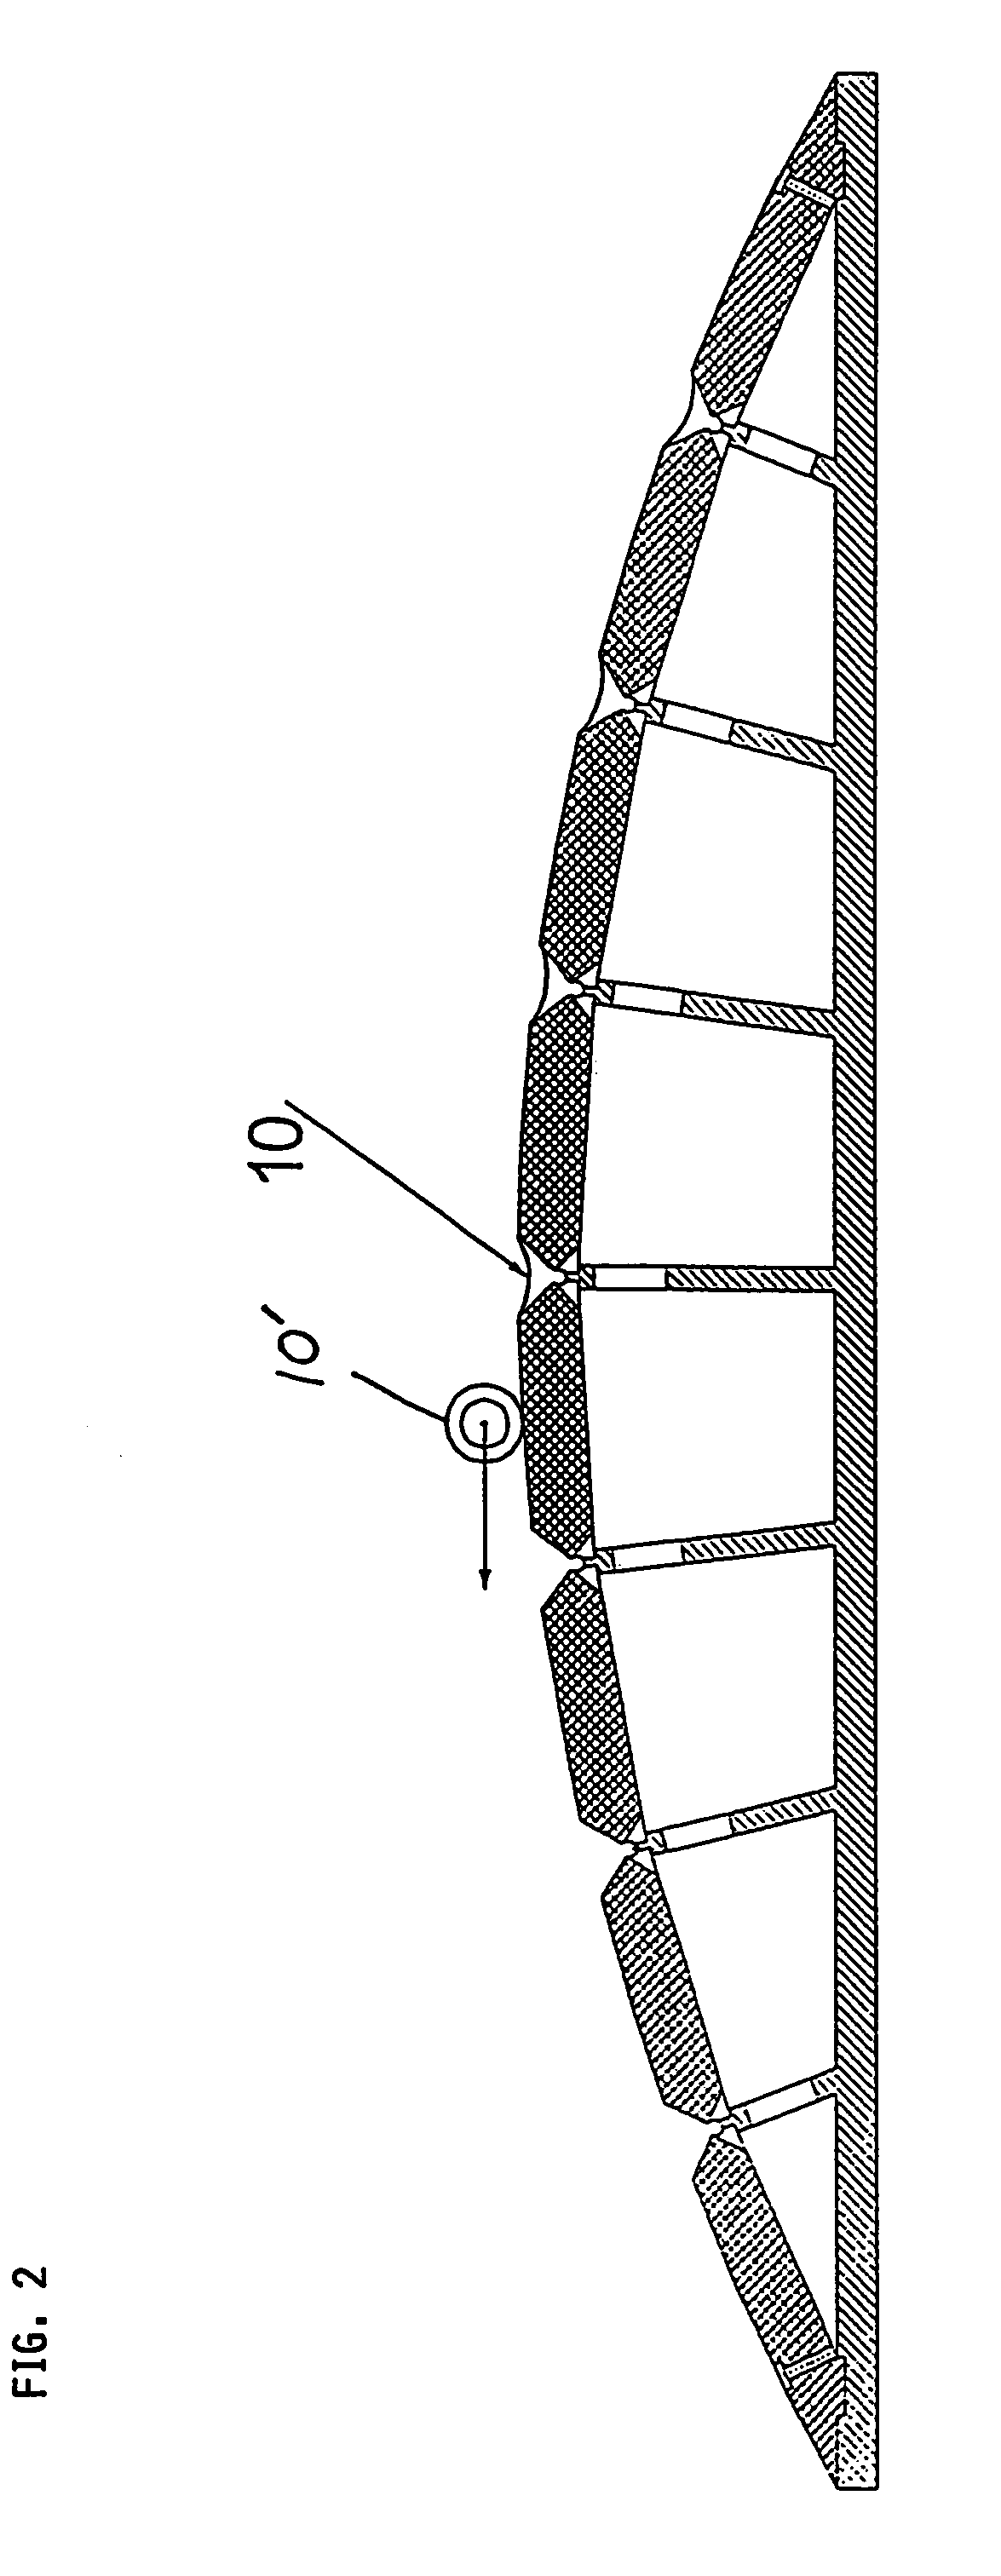 Automated fabrication of an integral fiber reinforced composite structural component using a positioning and assembly support